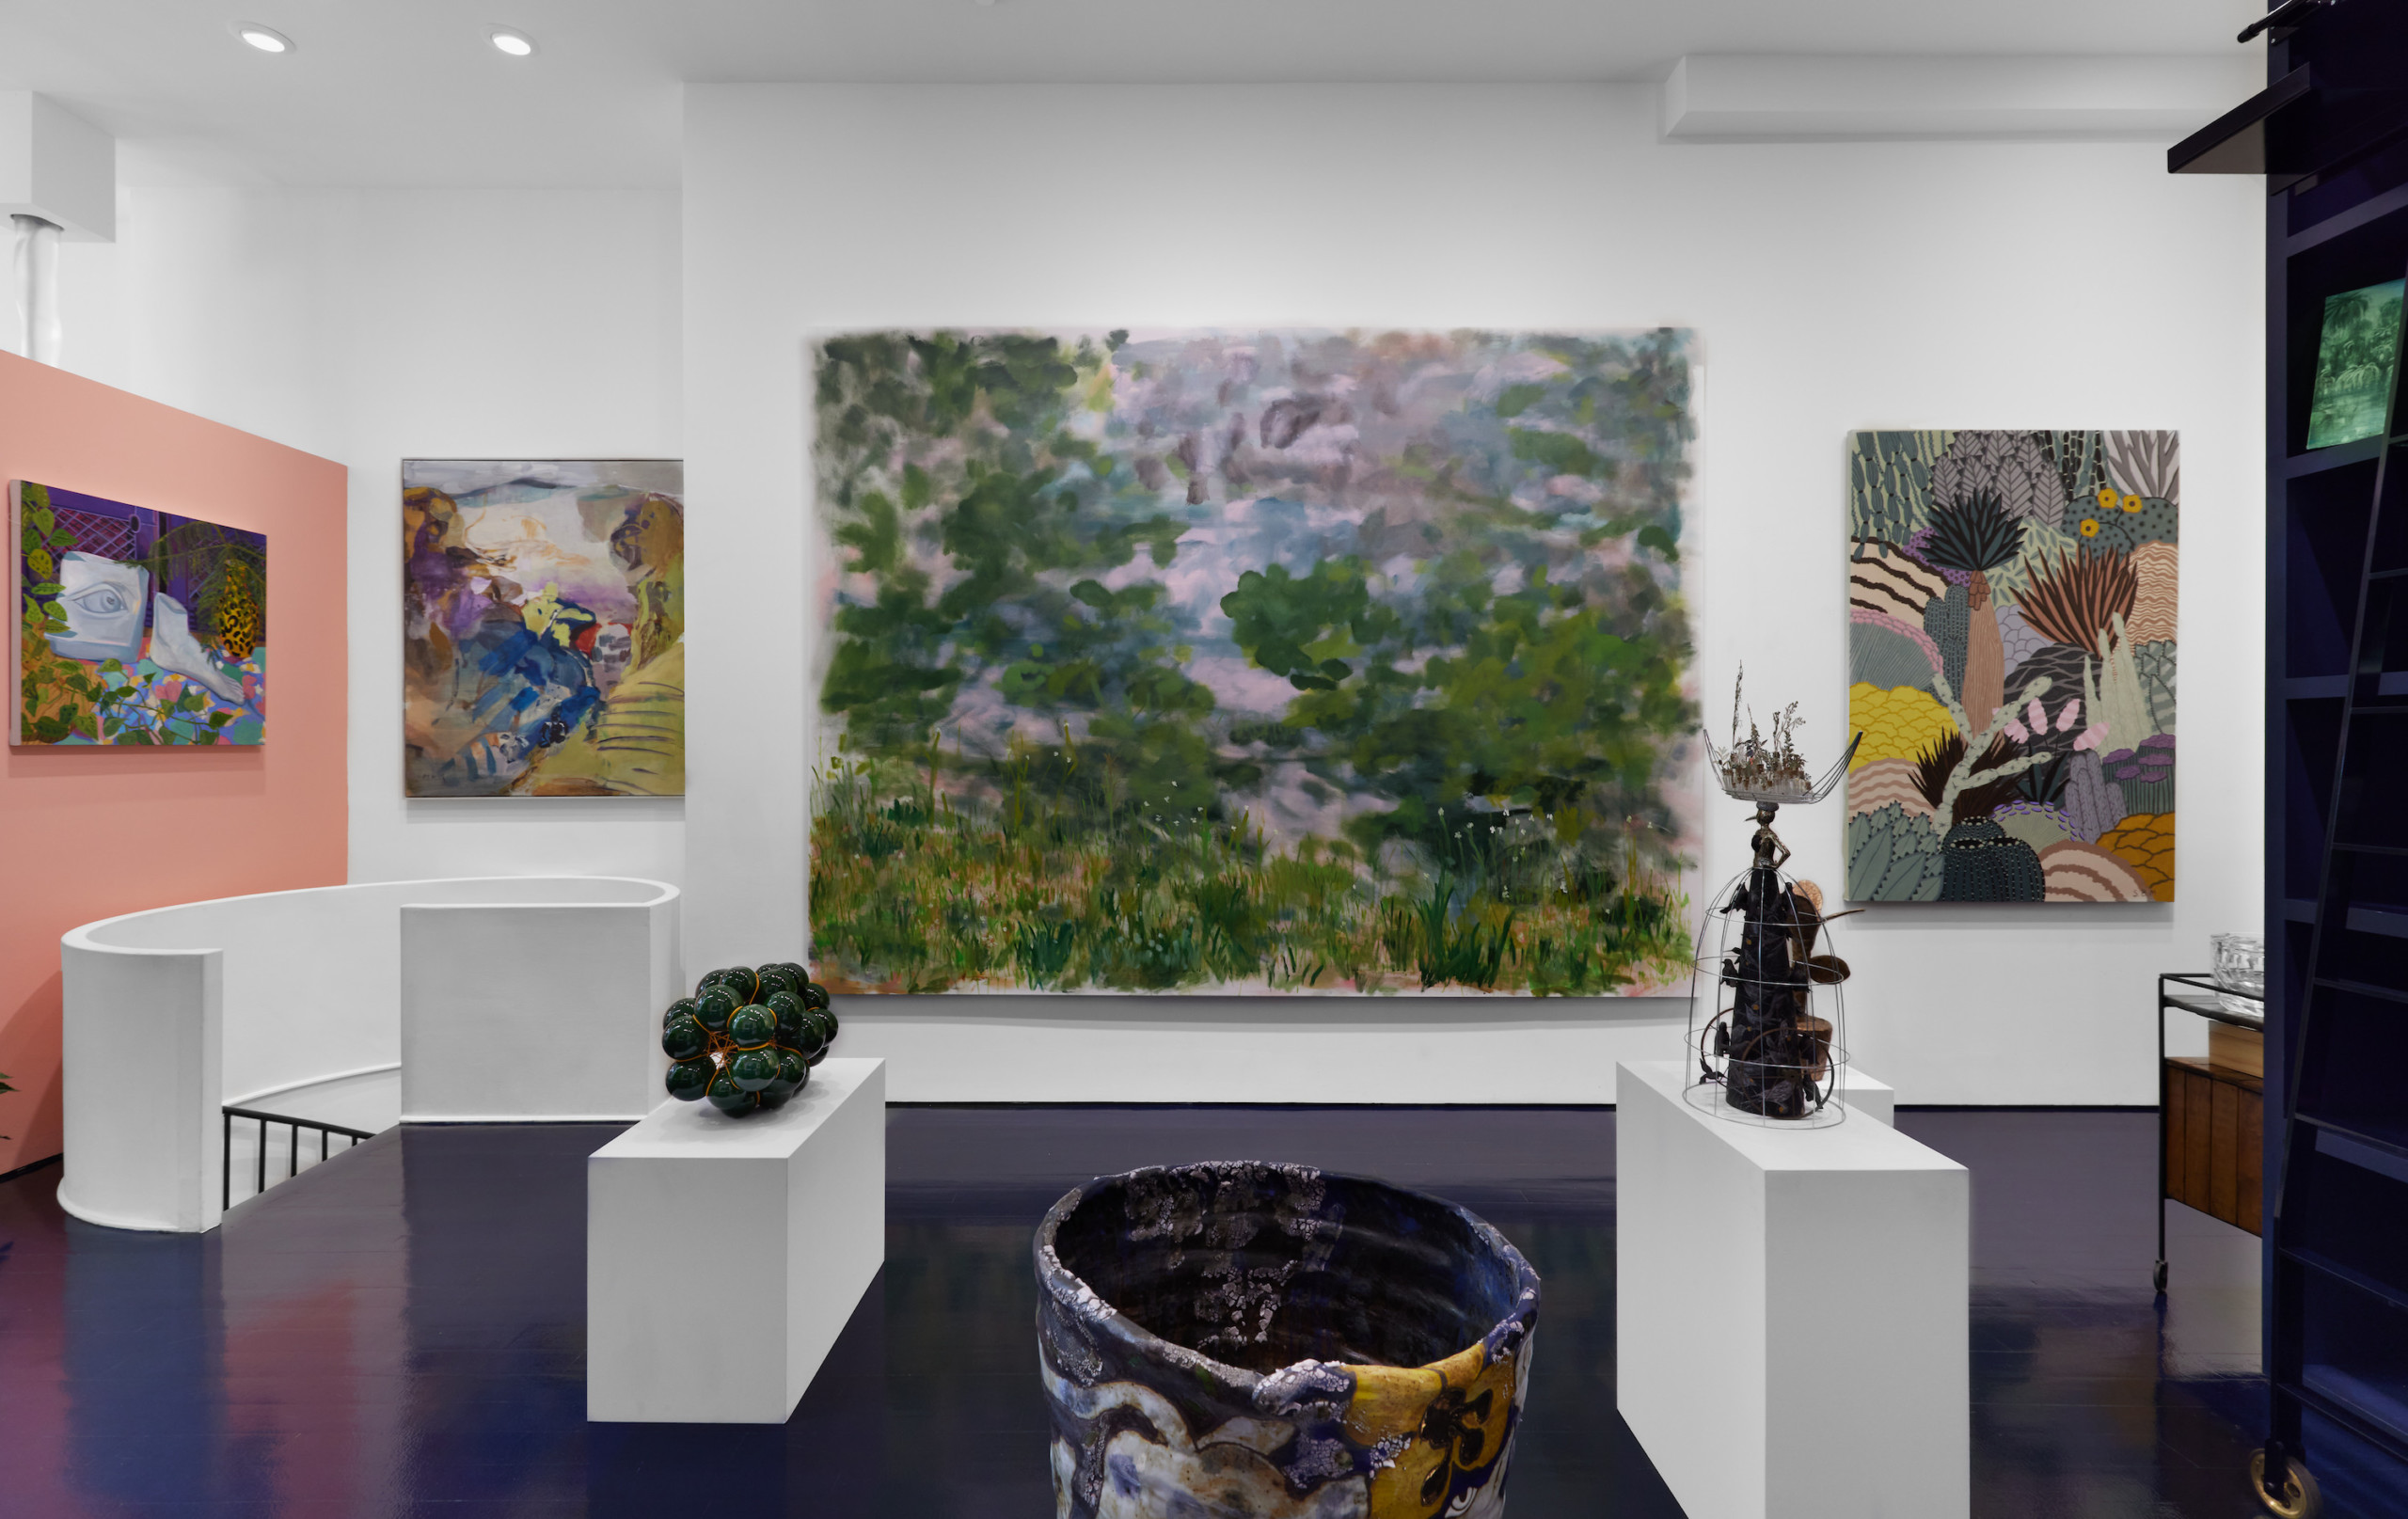 installation view of ridiculous sublime gallery show featuring work by trevor shimizu of forrest, the painting surrounded by other works including ceramic and paintings